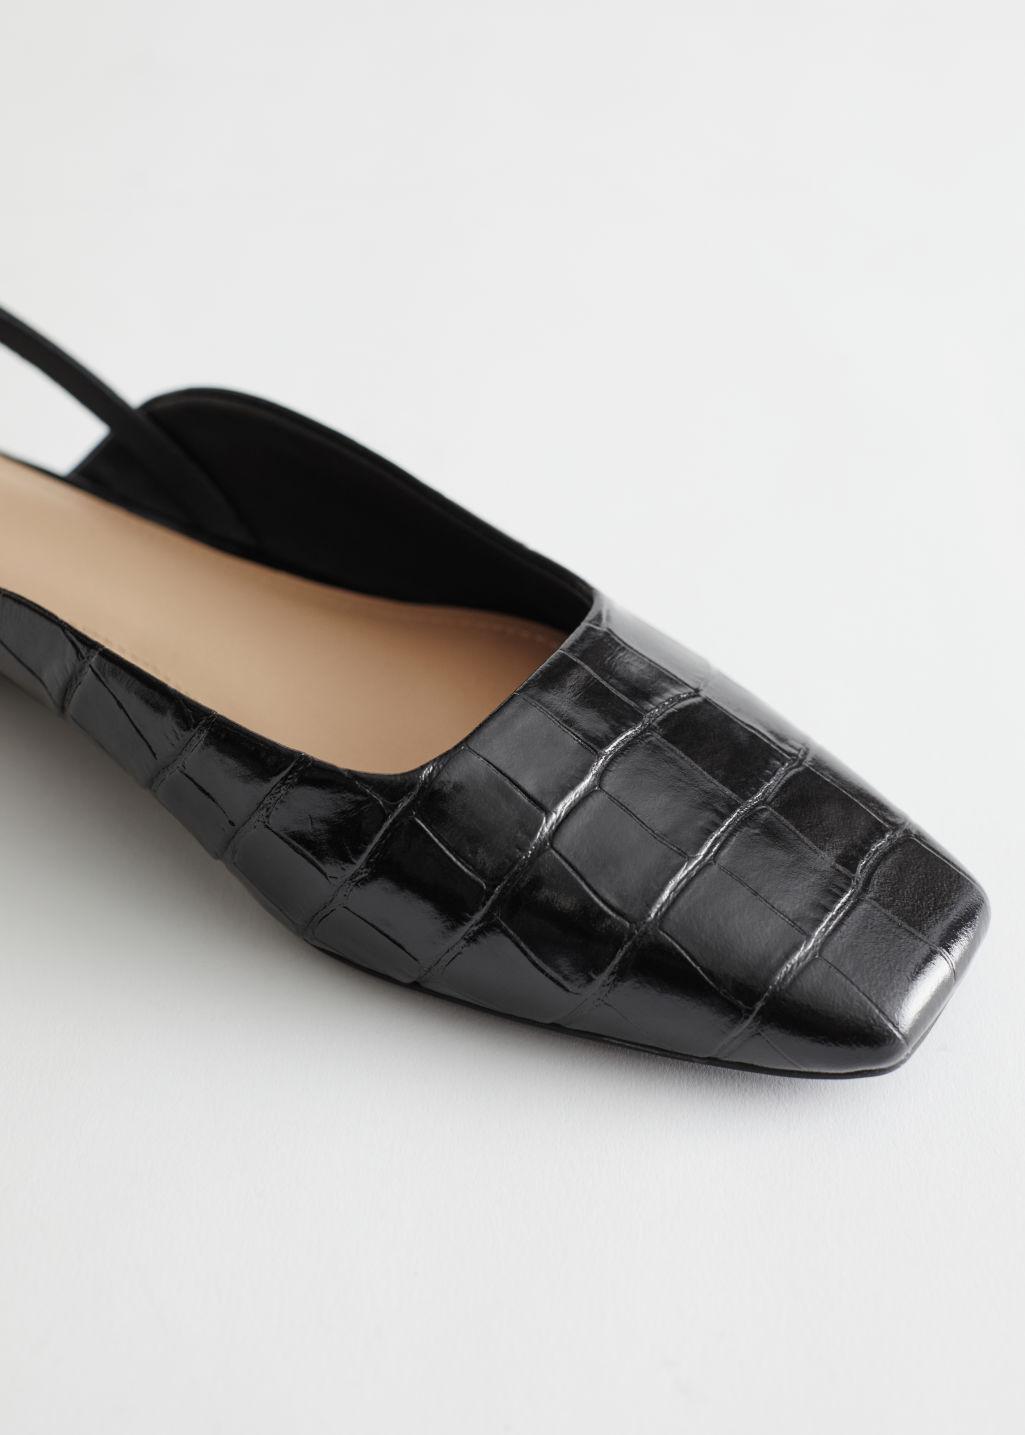 & Other Stories Leather Square Toe Ballerina Flats in Black | Lyst